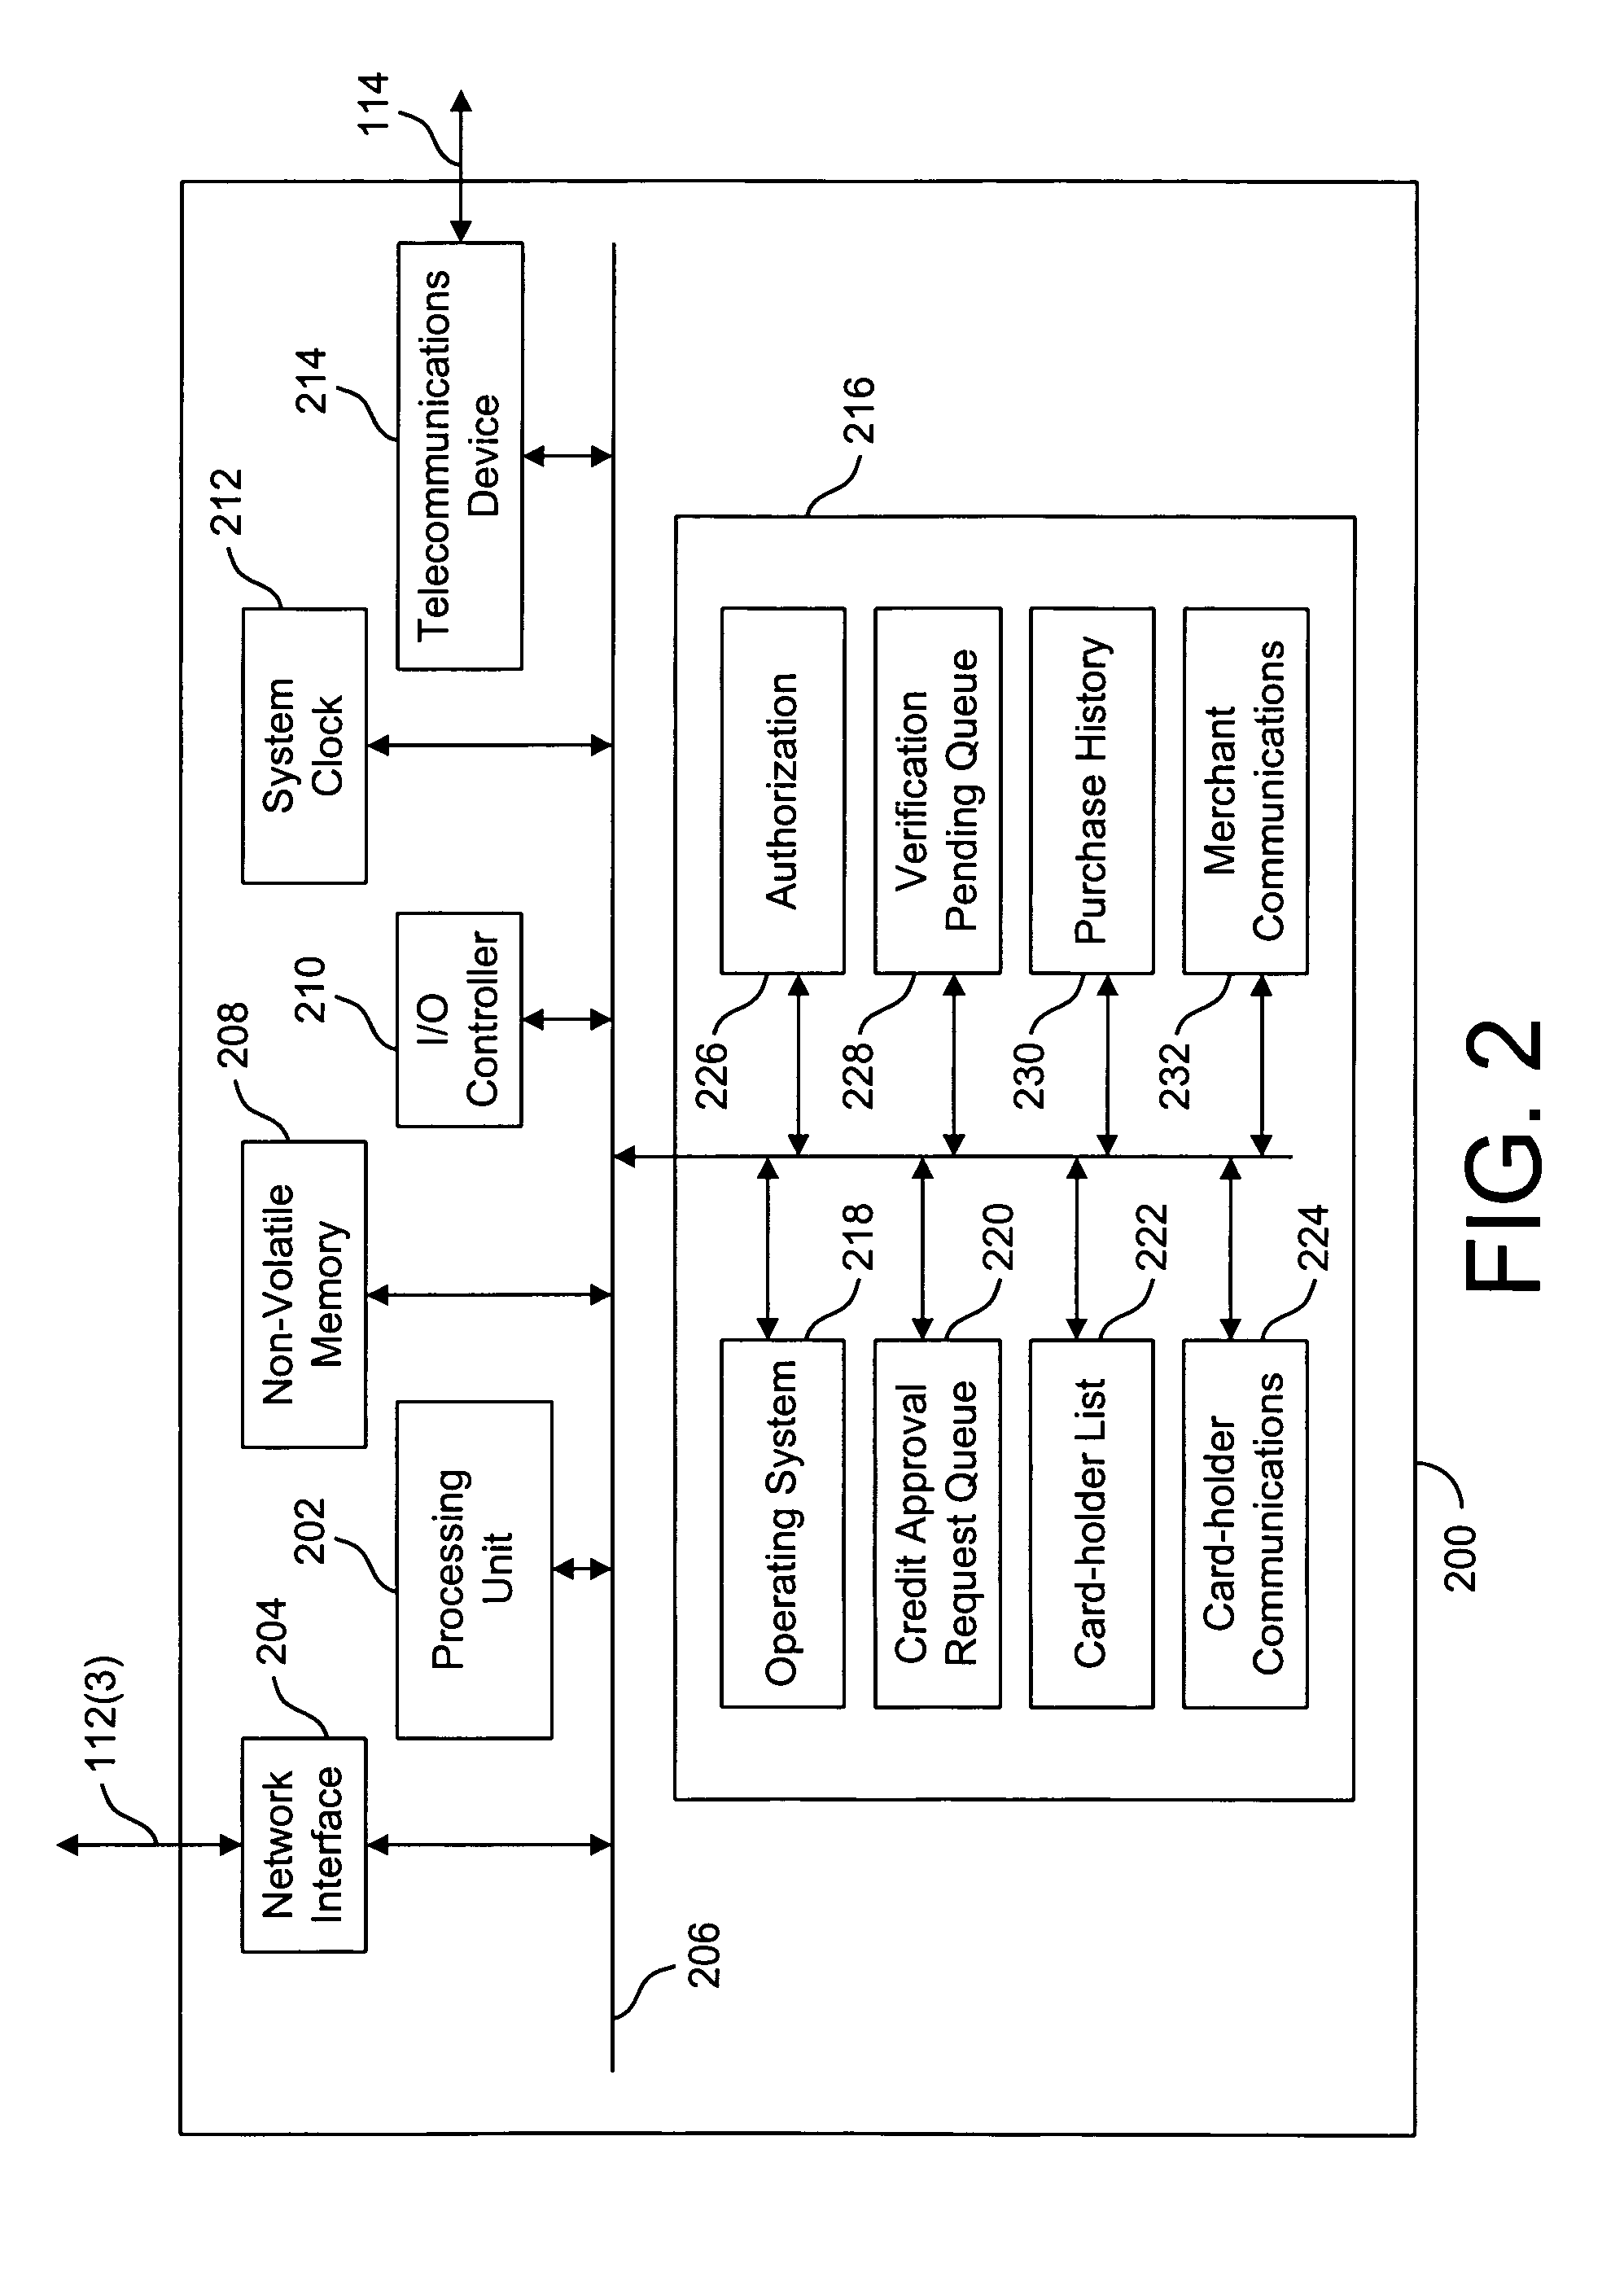 System and method for verifying commercial transactions